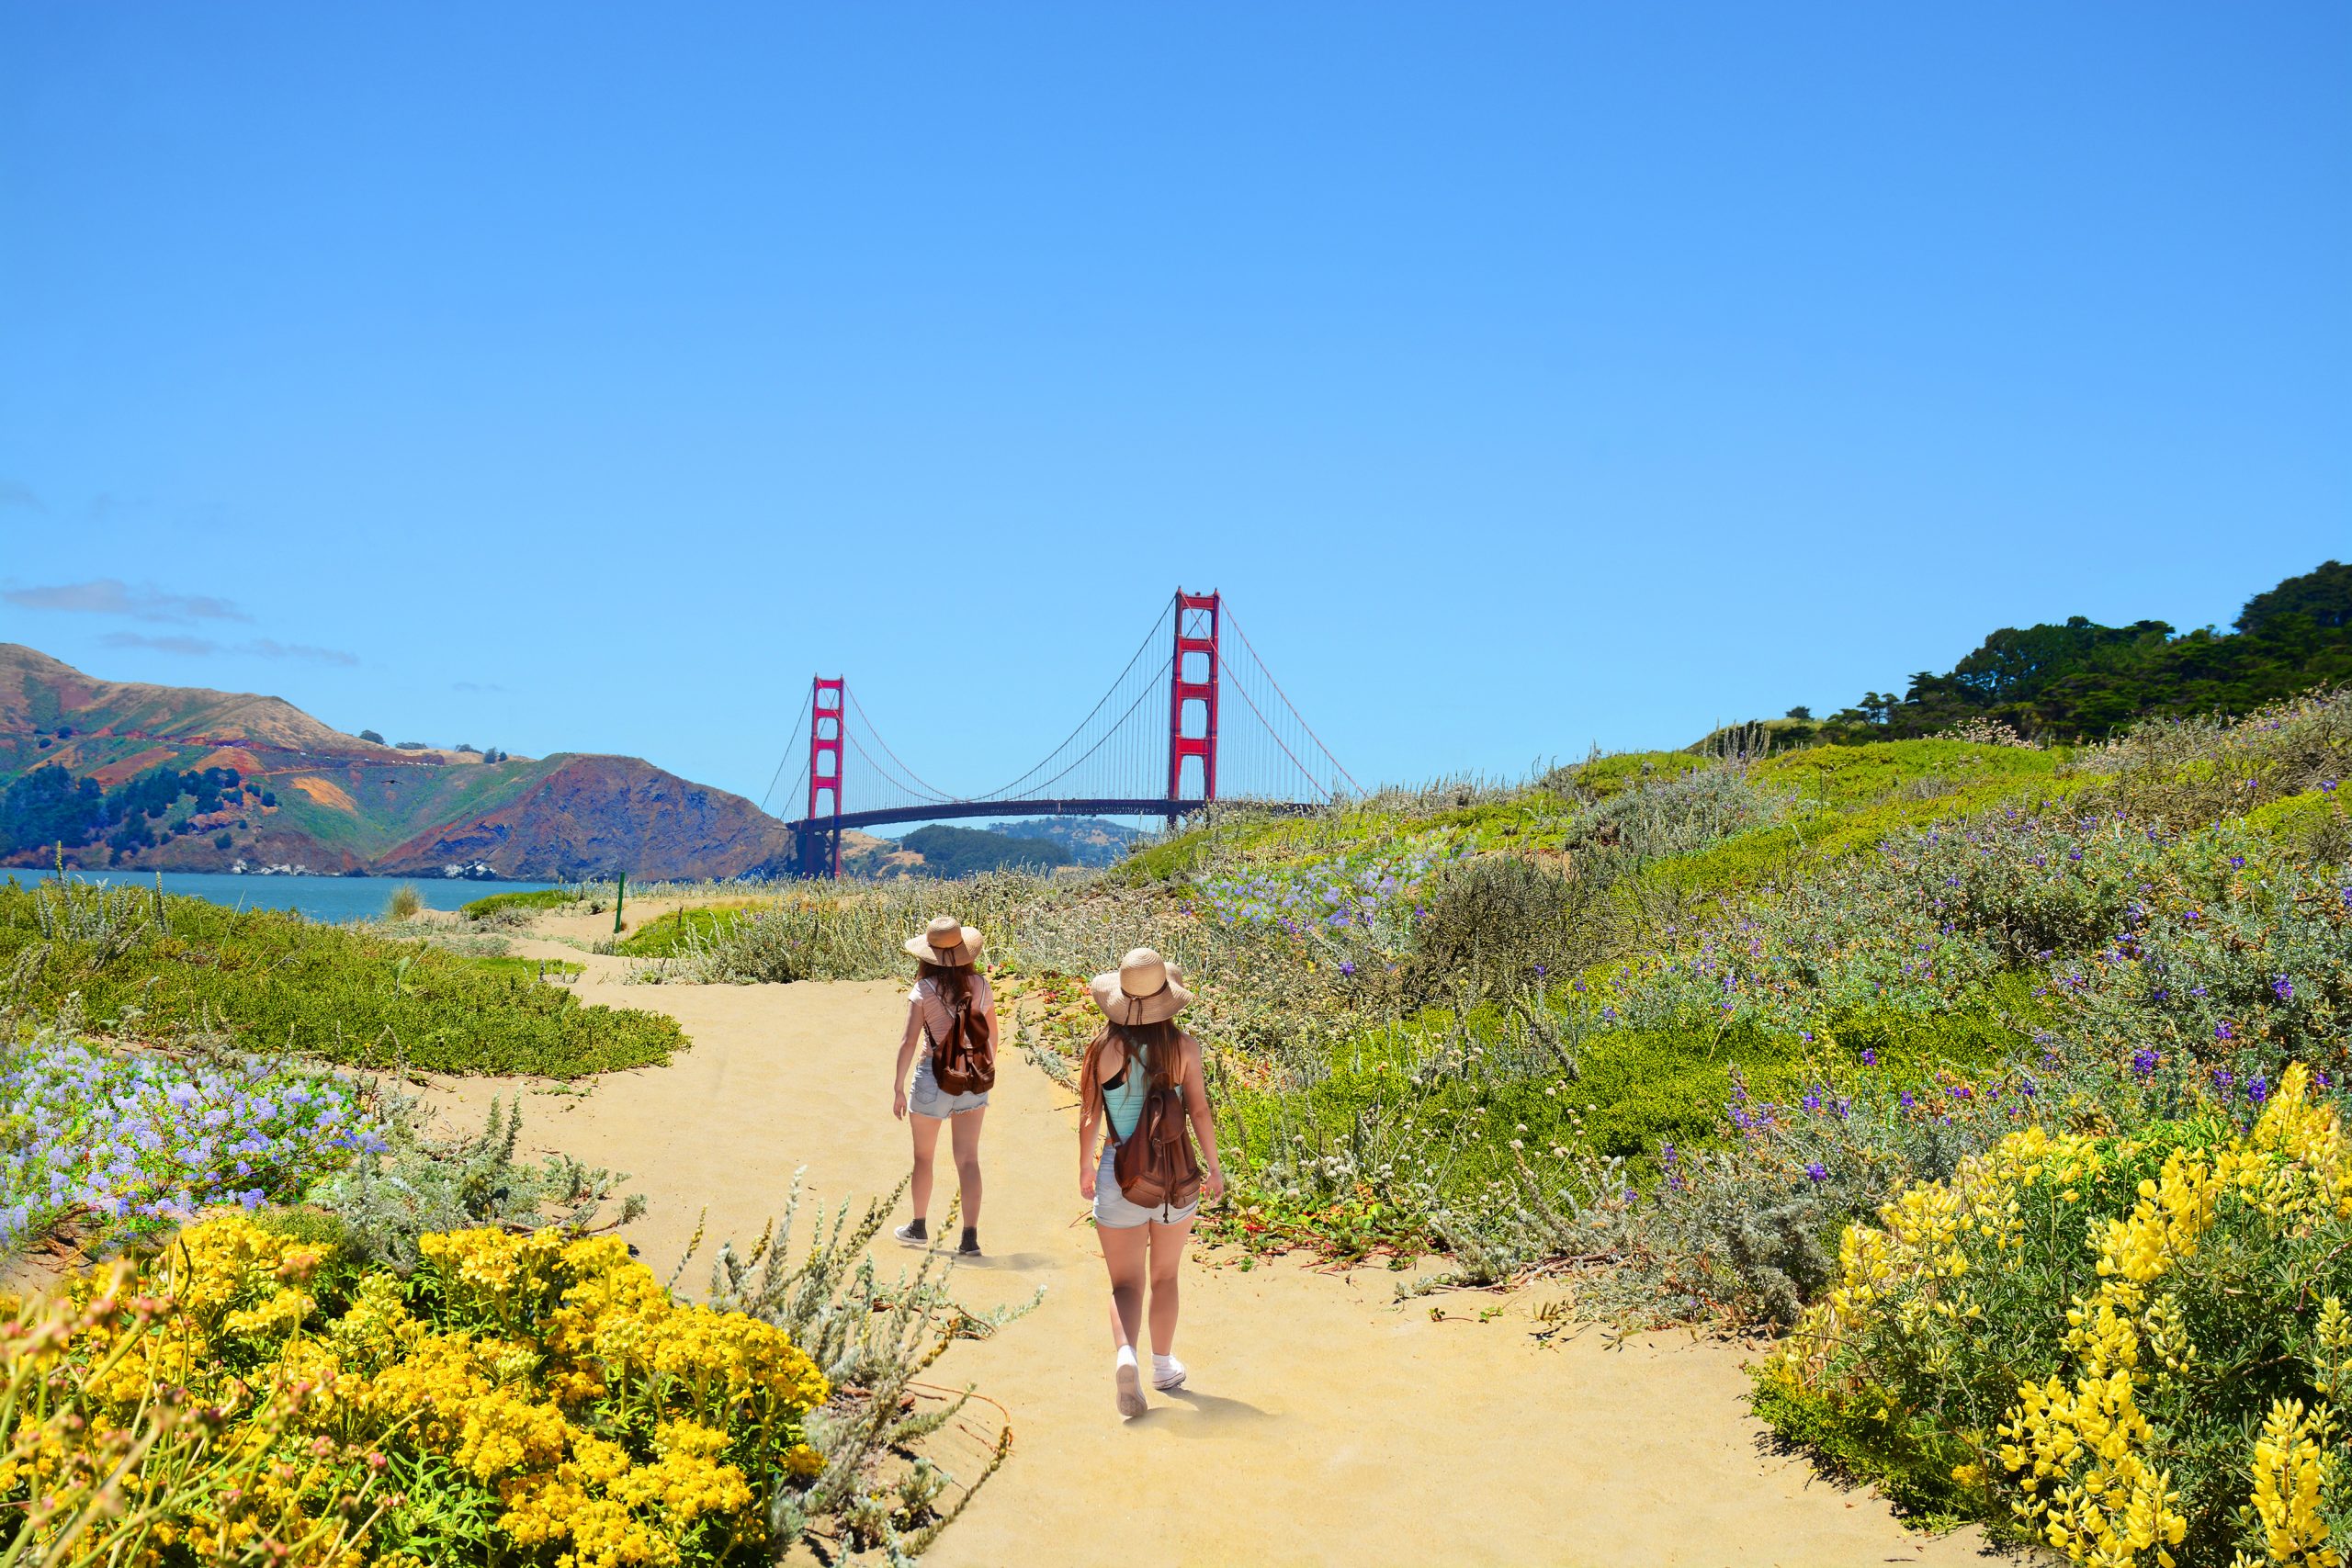 Two friends hike on a sandy trail towards the Golden Gate Bridge in San Francisco, California